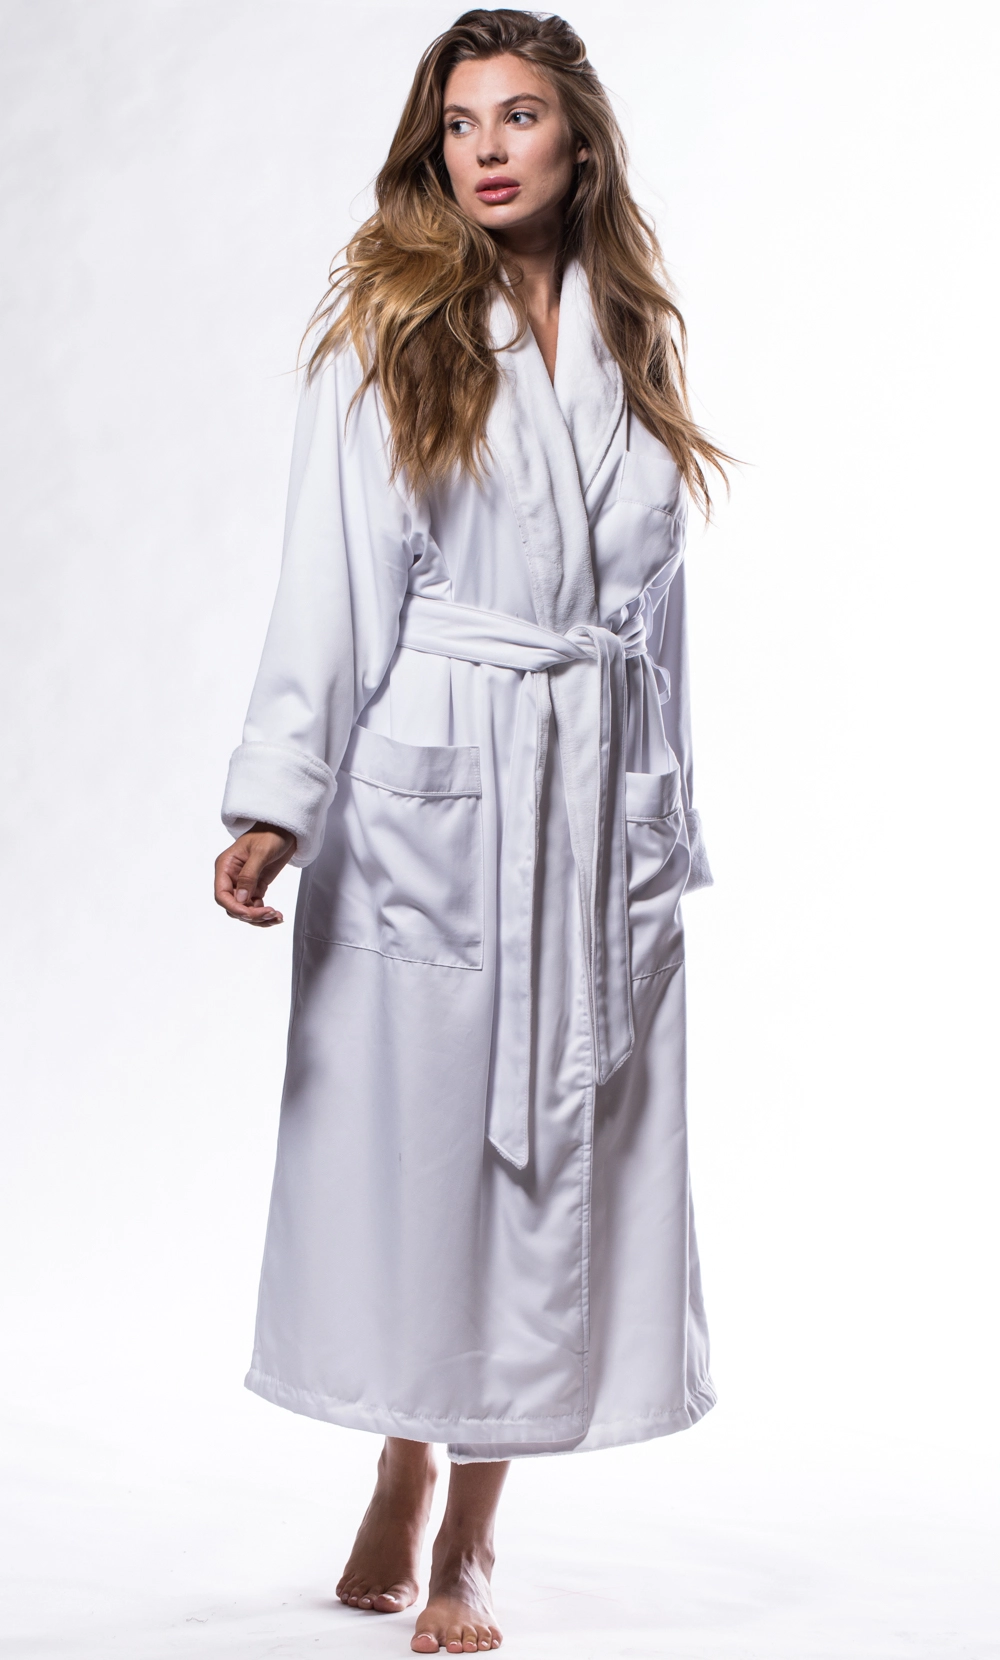 Women's :: Luxury Microfiber Plush Lined Robe White - Wholesale bathrobes,  Spa robes, Kids robes, Cotton robes, Spa Slippers, Wholesale Towels